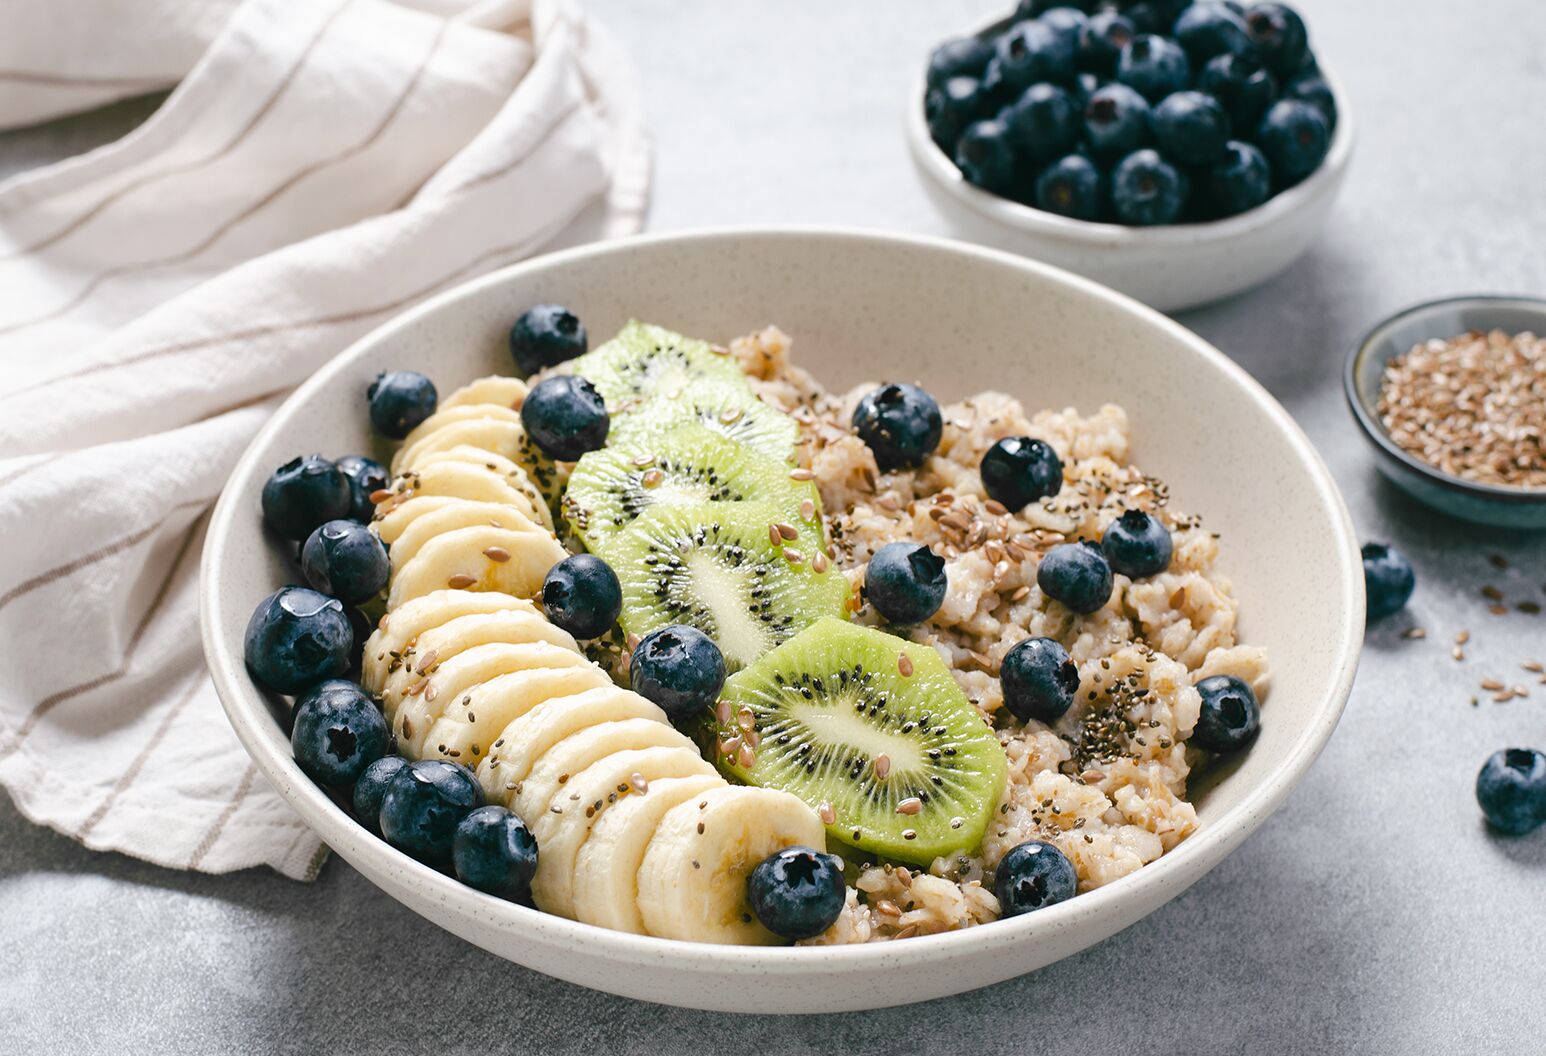 A bowl of oatmeal, kiwi, blueberries, and bananas, surrounded by a small bowl of grains and blueberries.